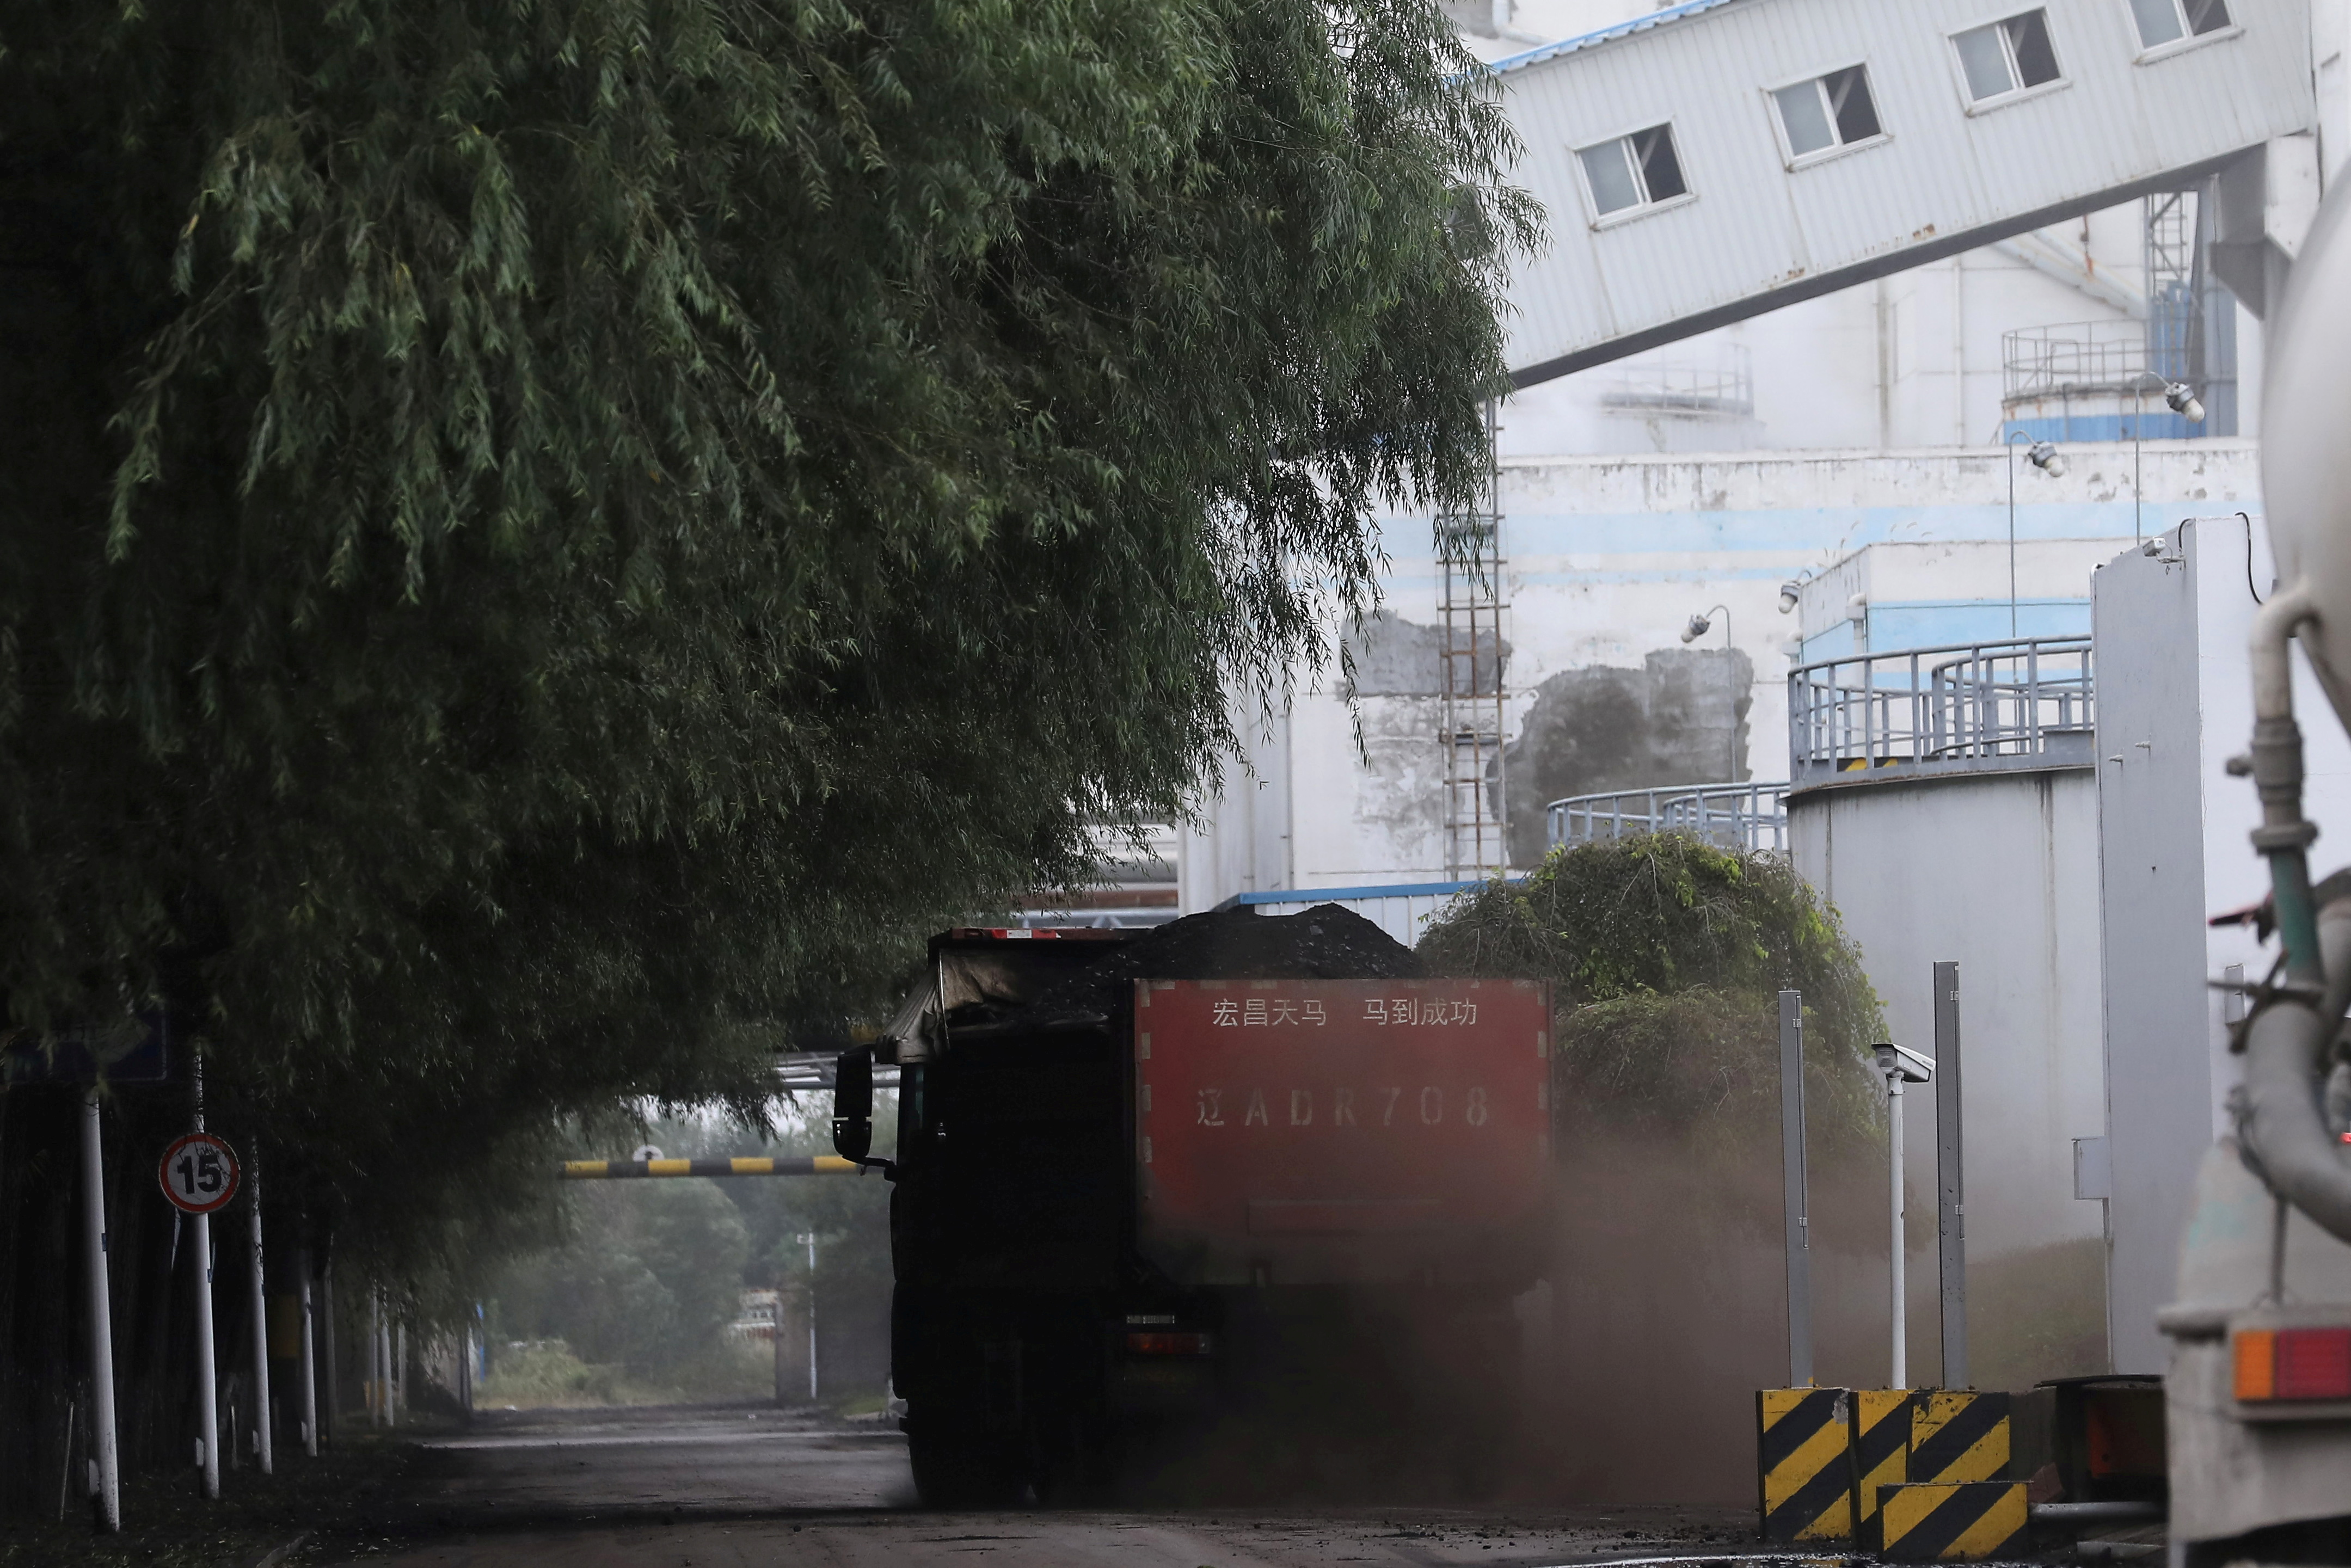 Truck transports coal at a coal-fired power plant in Shenyang, Liaoning